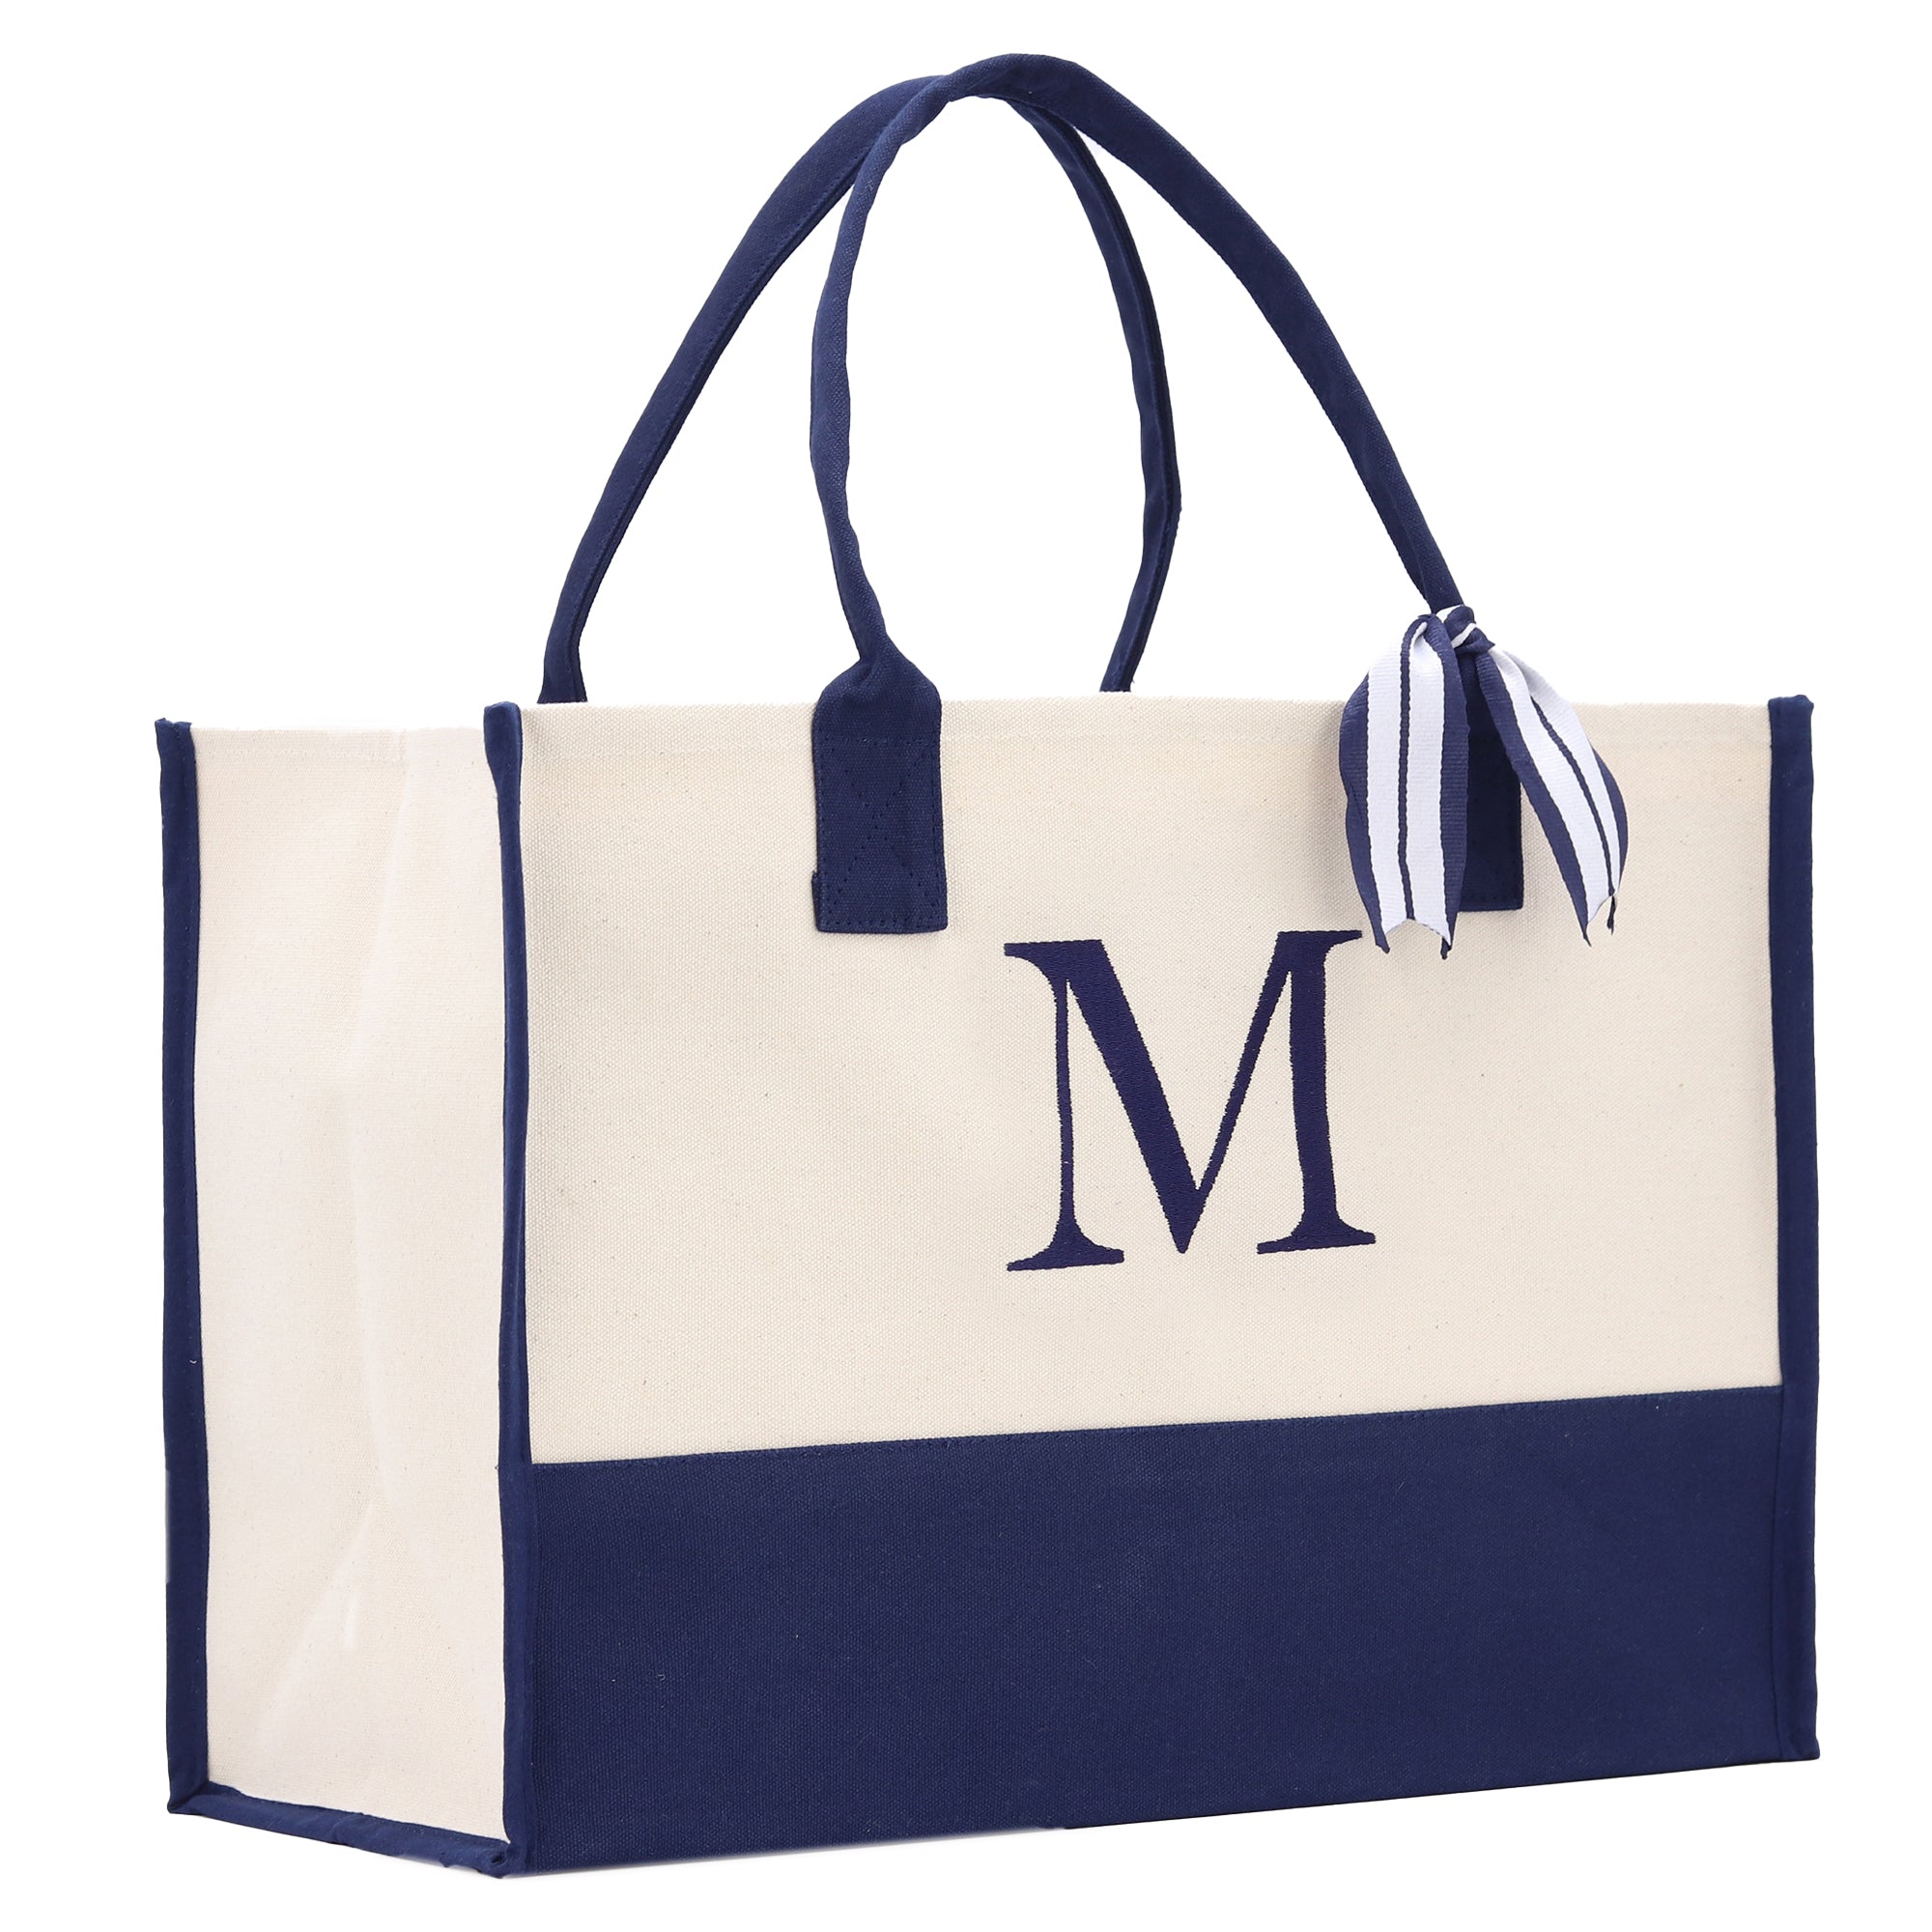 Monogram Tote Bag with 100% Cotton Canvas and a Chic Personalized Monogram Navy Blue Vanessa Rosella Block M 